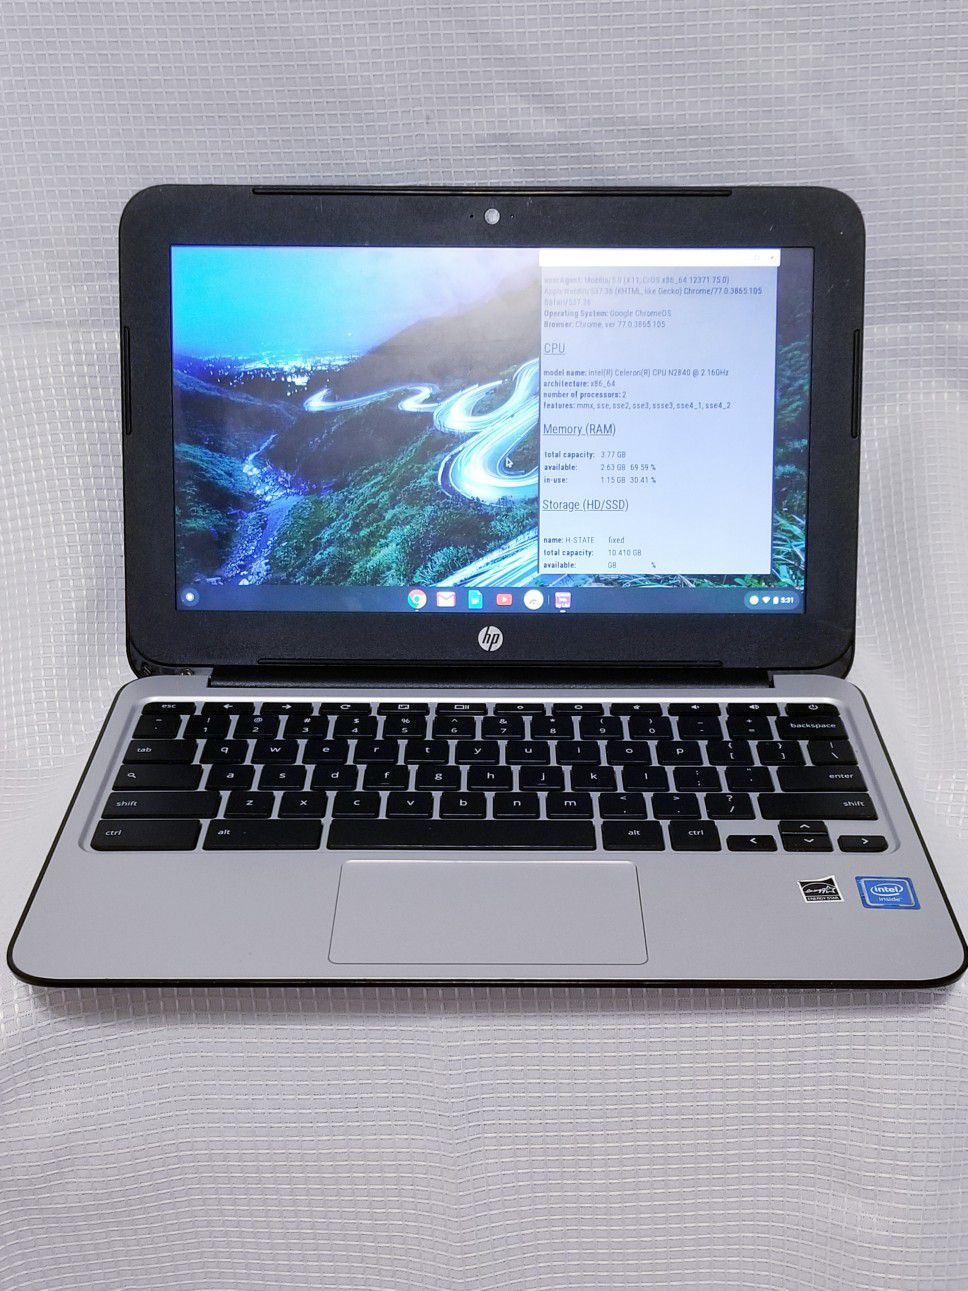 HP CHROMEBOOK 11 LAPTOP FOR SALE!!!